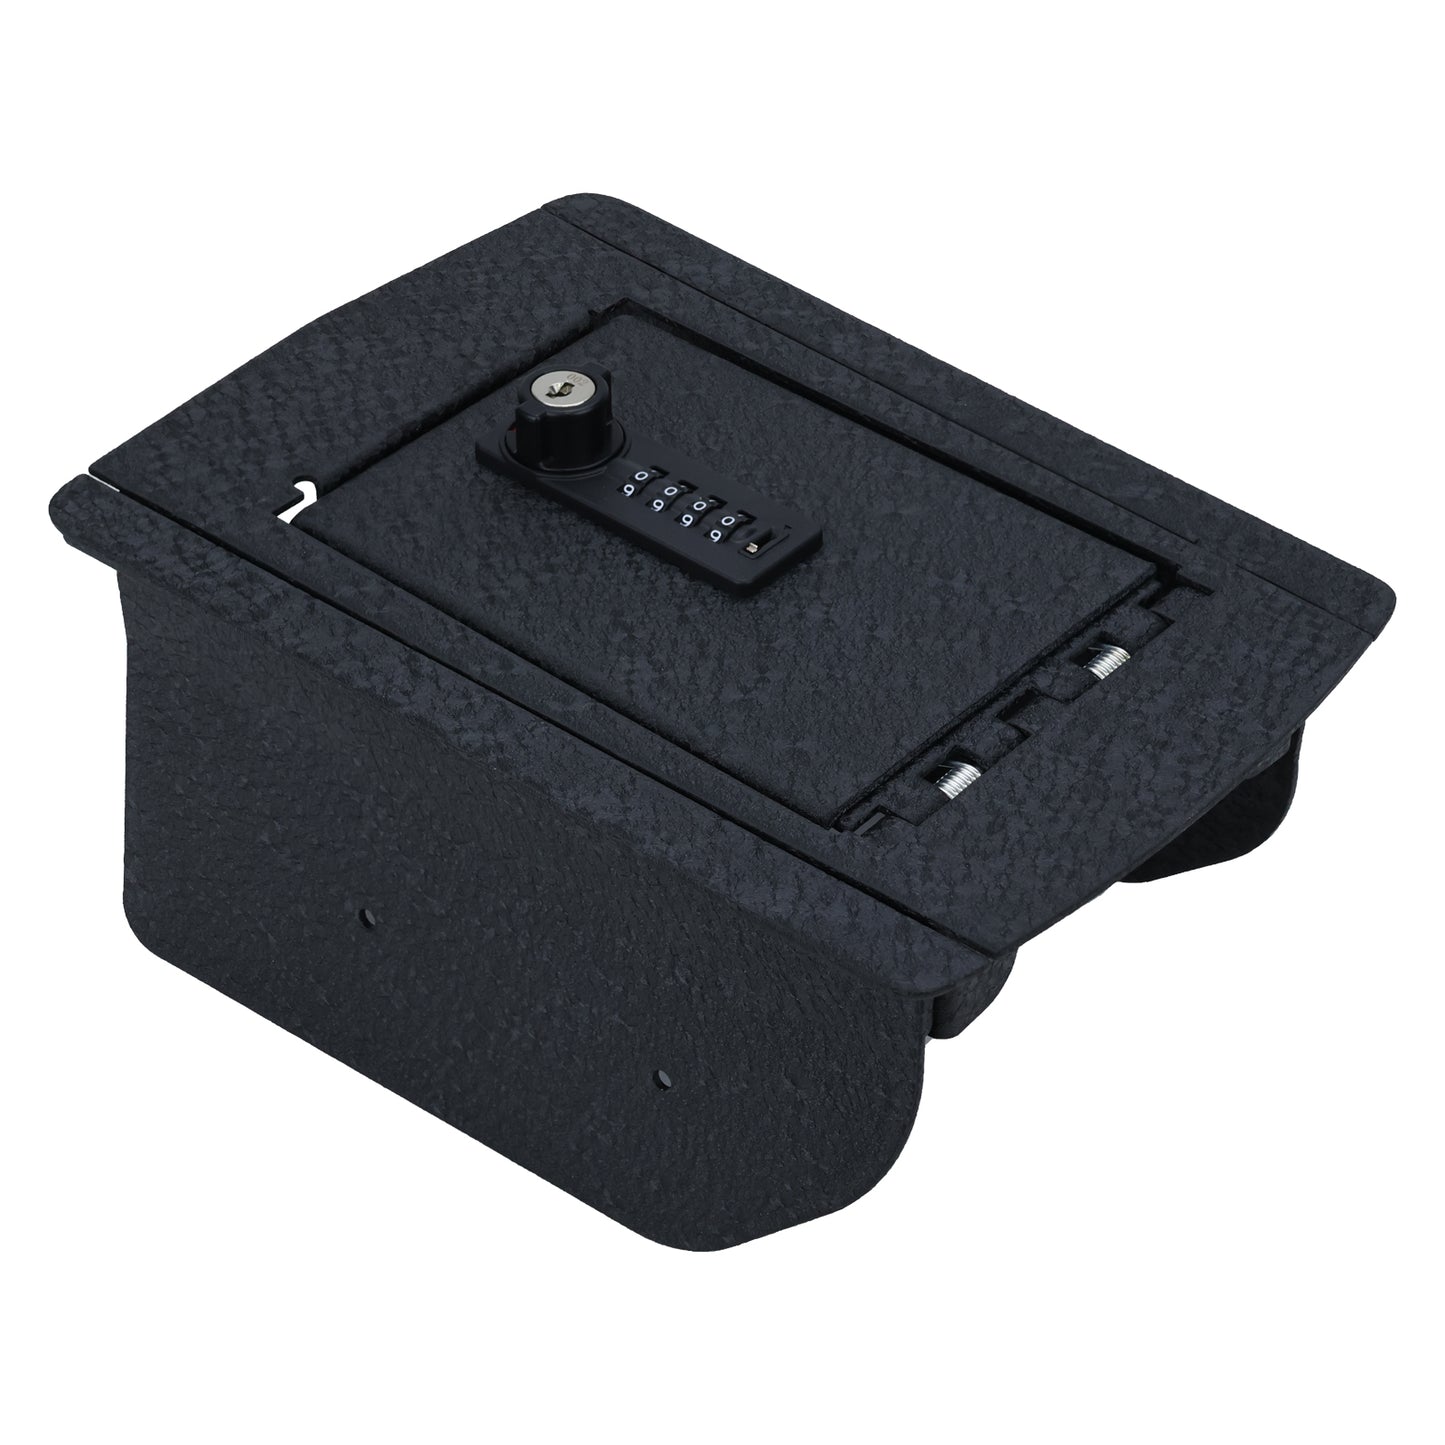 Center Console Safe Gun Safe for 2014-2020 Jeep Grand Cherokee and Dodge Durango, 4-Digit Combination Lock with Key